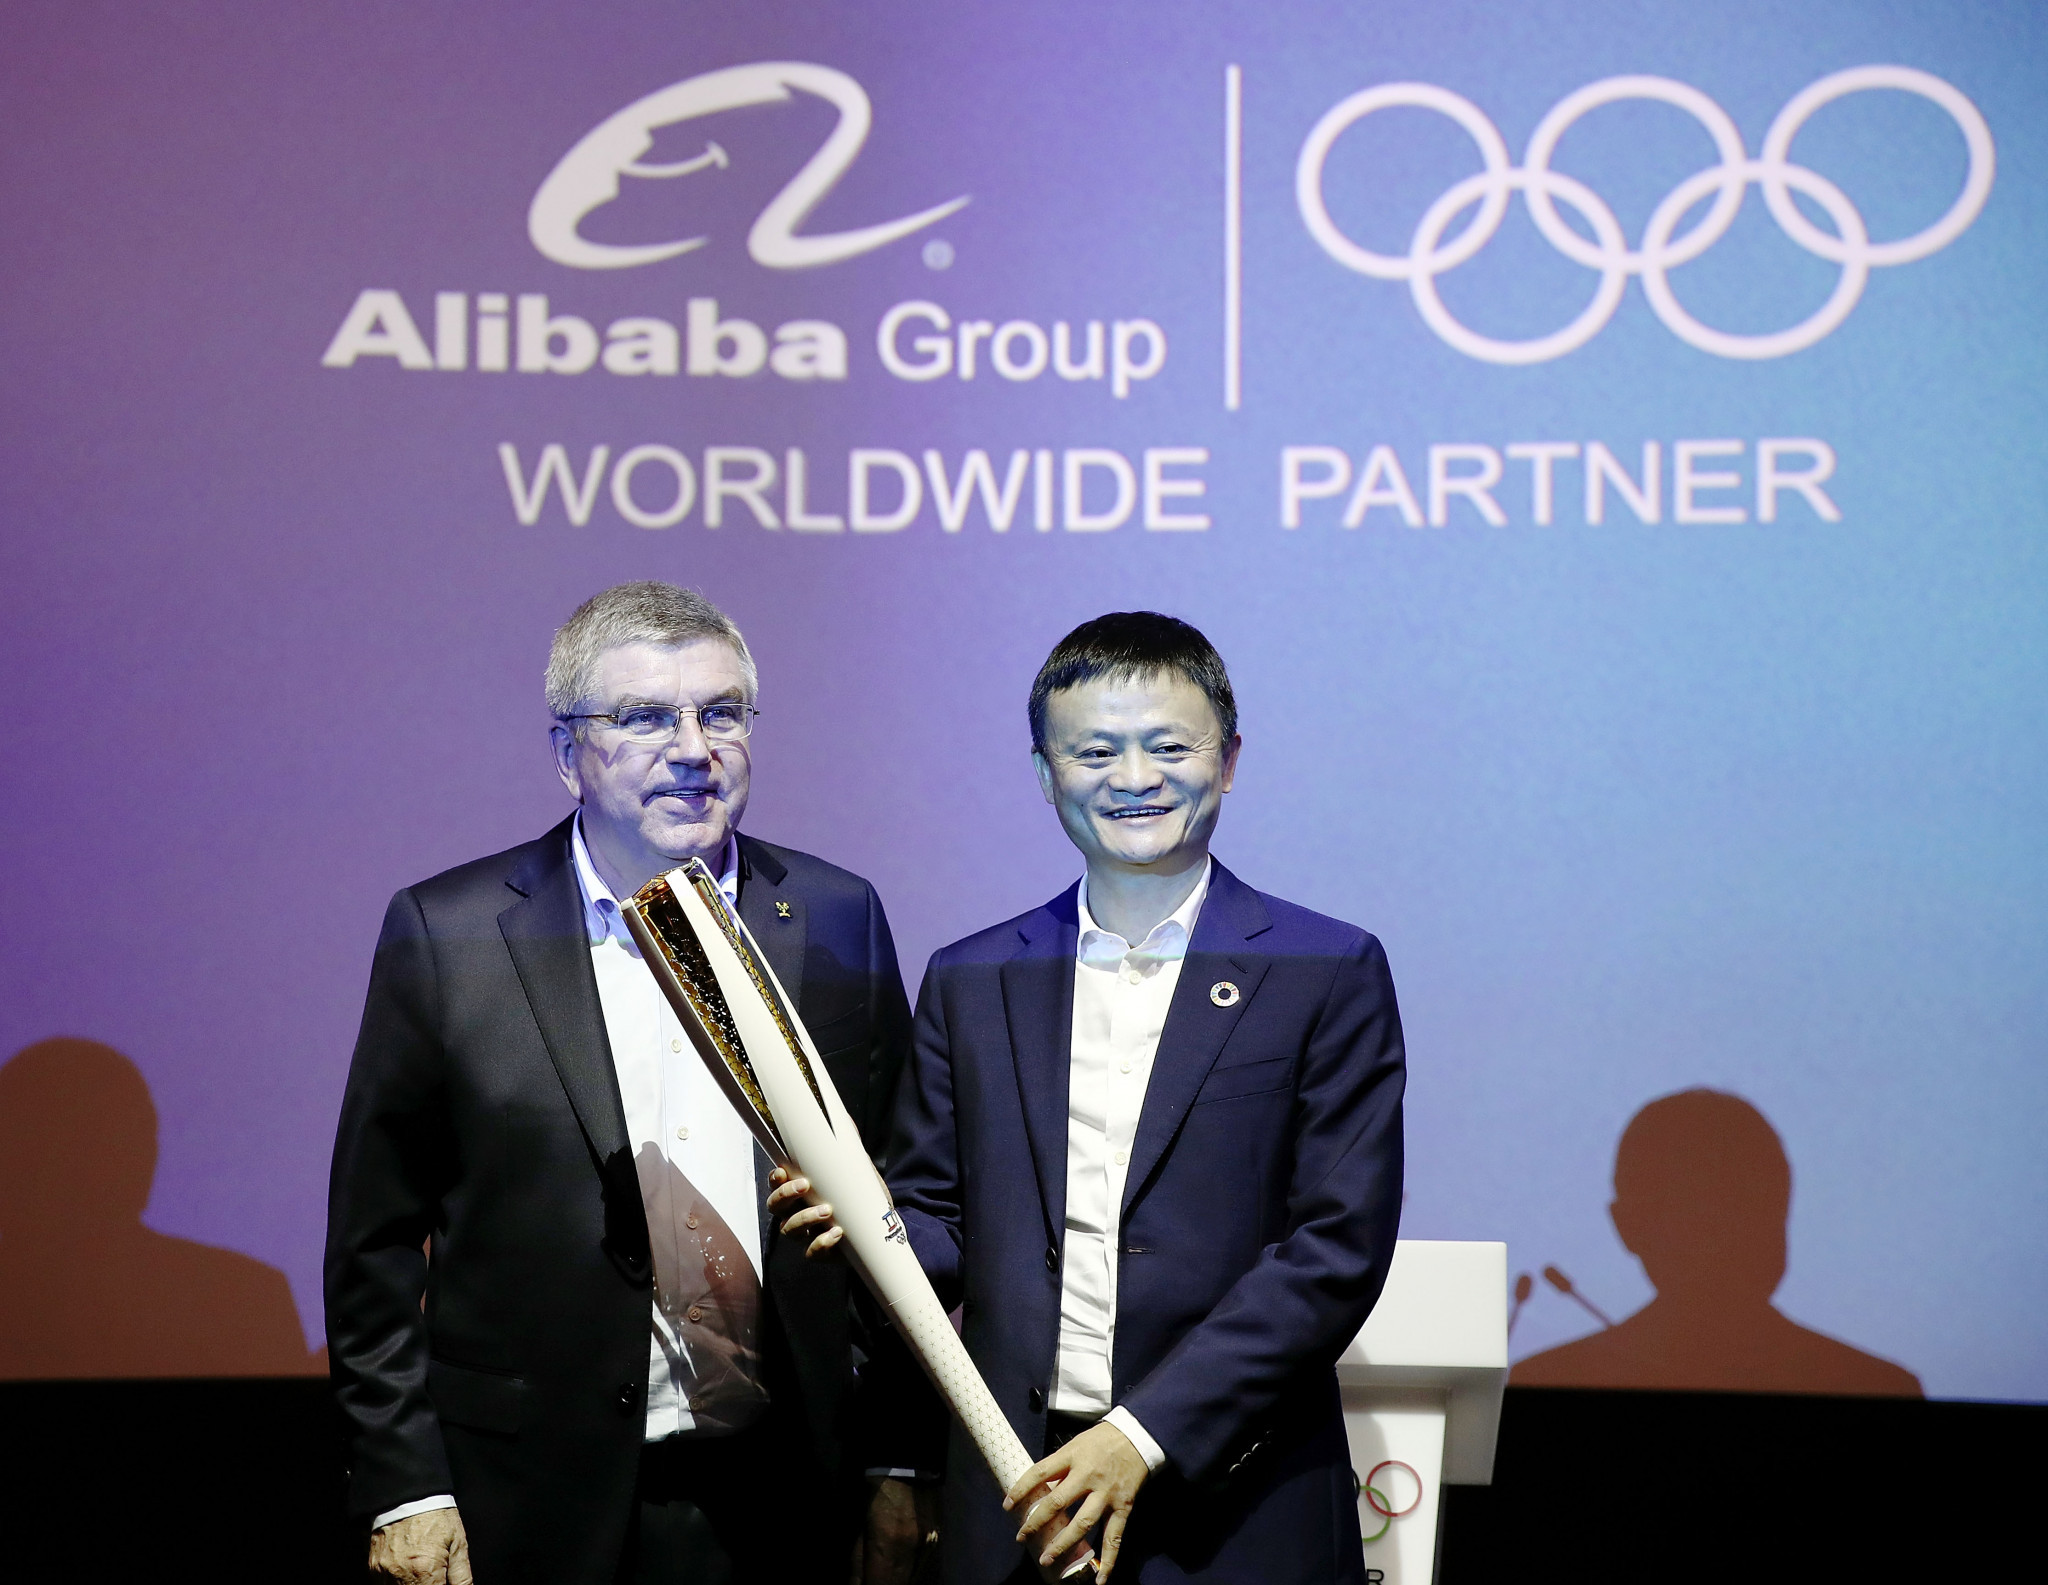 Alibaba Group joined The Olympic Partner worldwide sponsorship programme in 2017, with the deal running until 2028 ©Getty Images